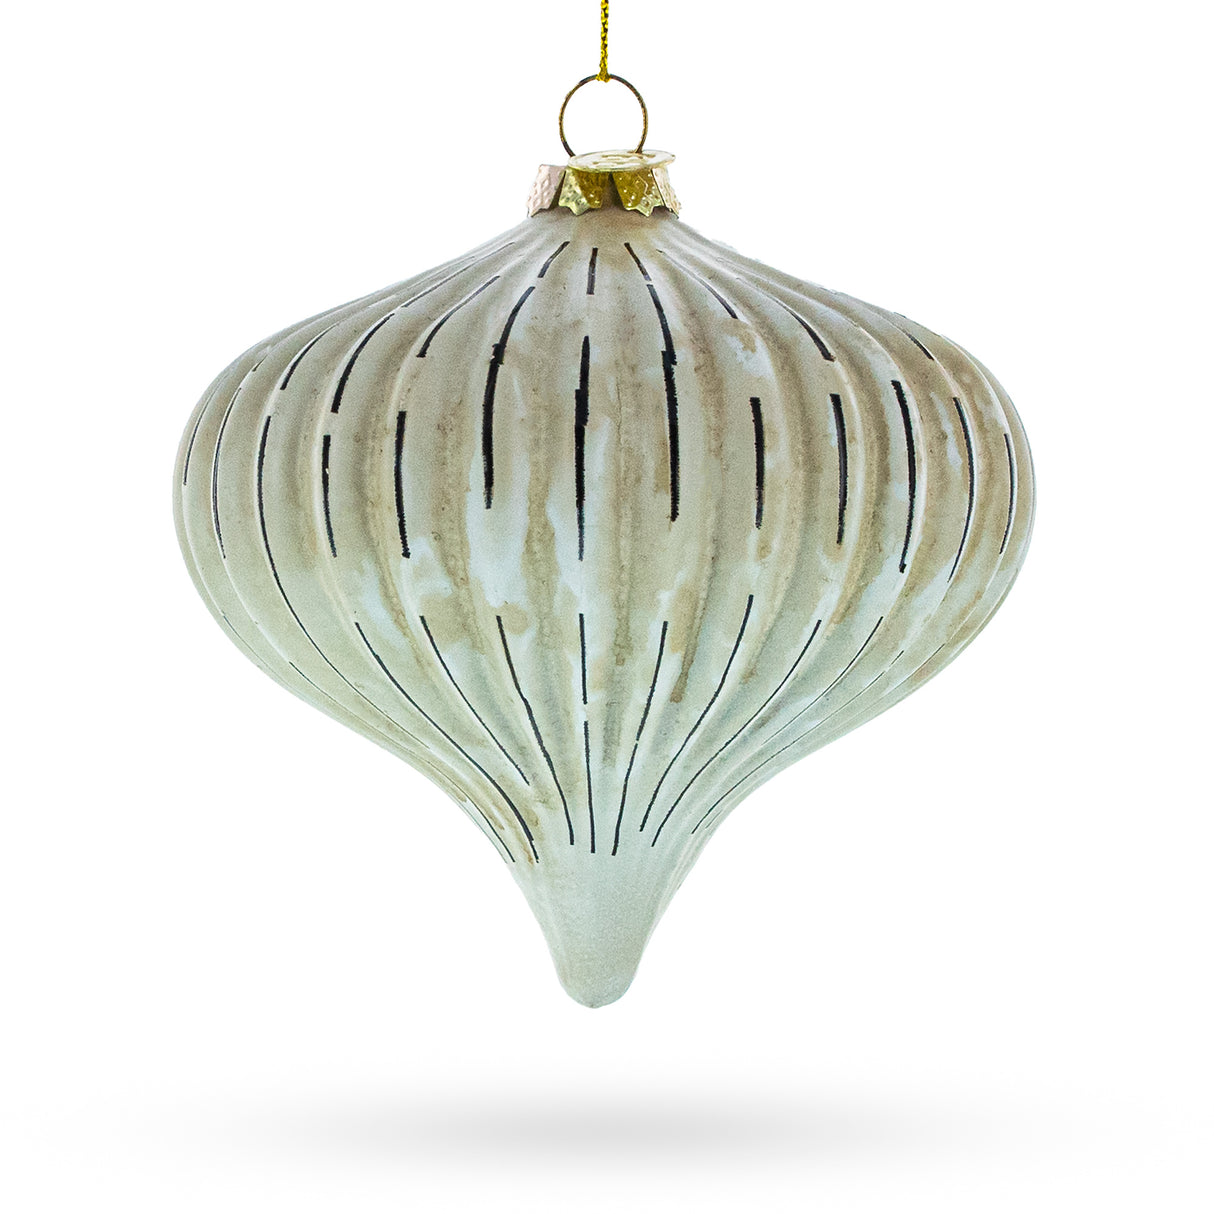 Glass Ribbed Antique-Style Onion Finial -Timeless Blown Glass Christmas Ornament in Beige color